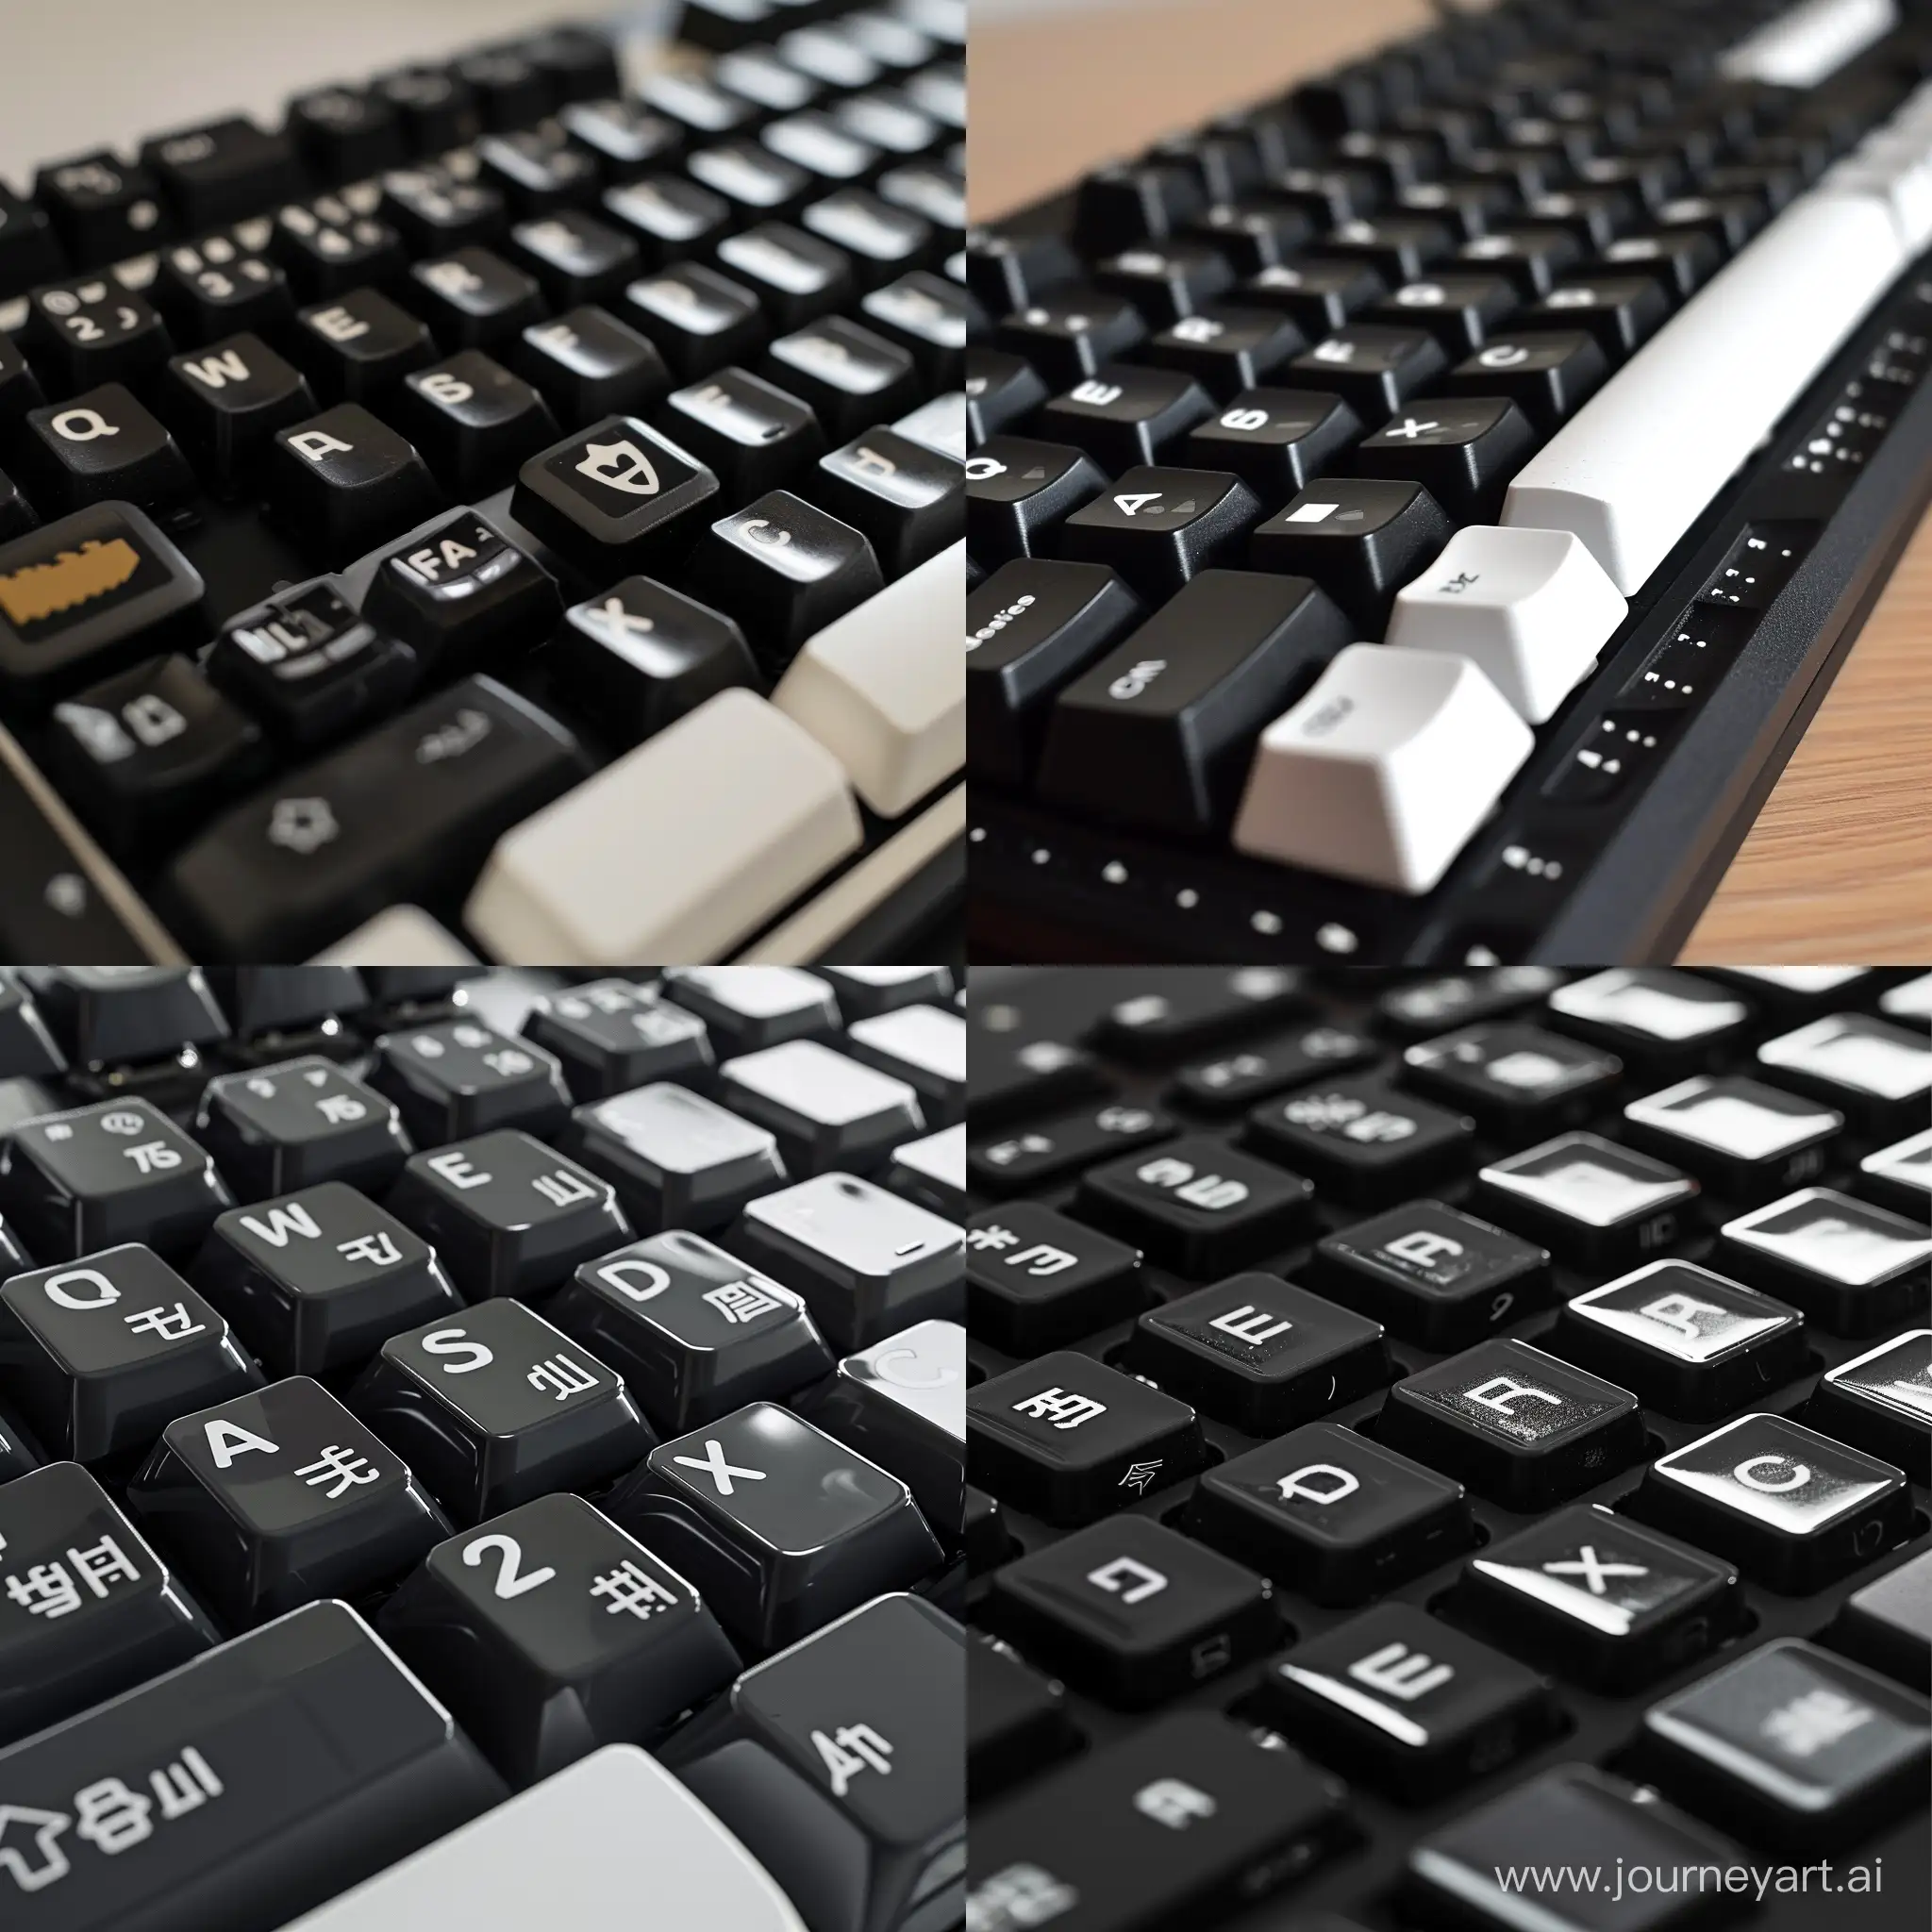 Close-up of a black and white keyboard with Cyrillic and Latin characters on separate keys, highlighting the versatility of bilingual computing.